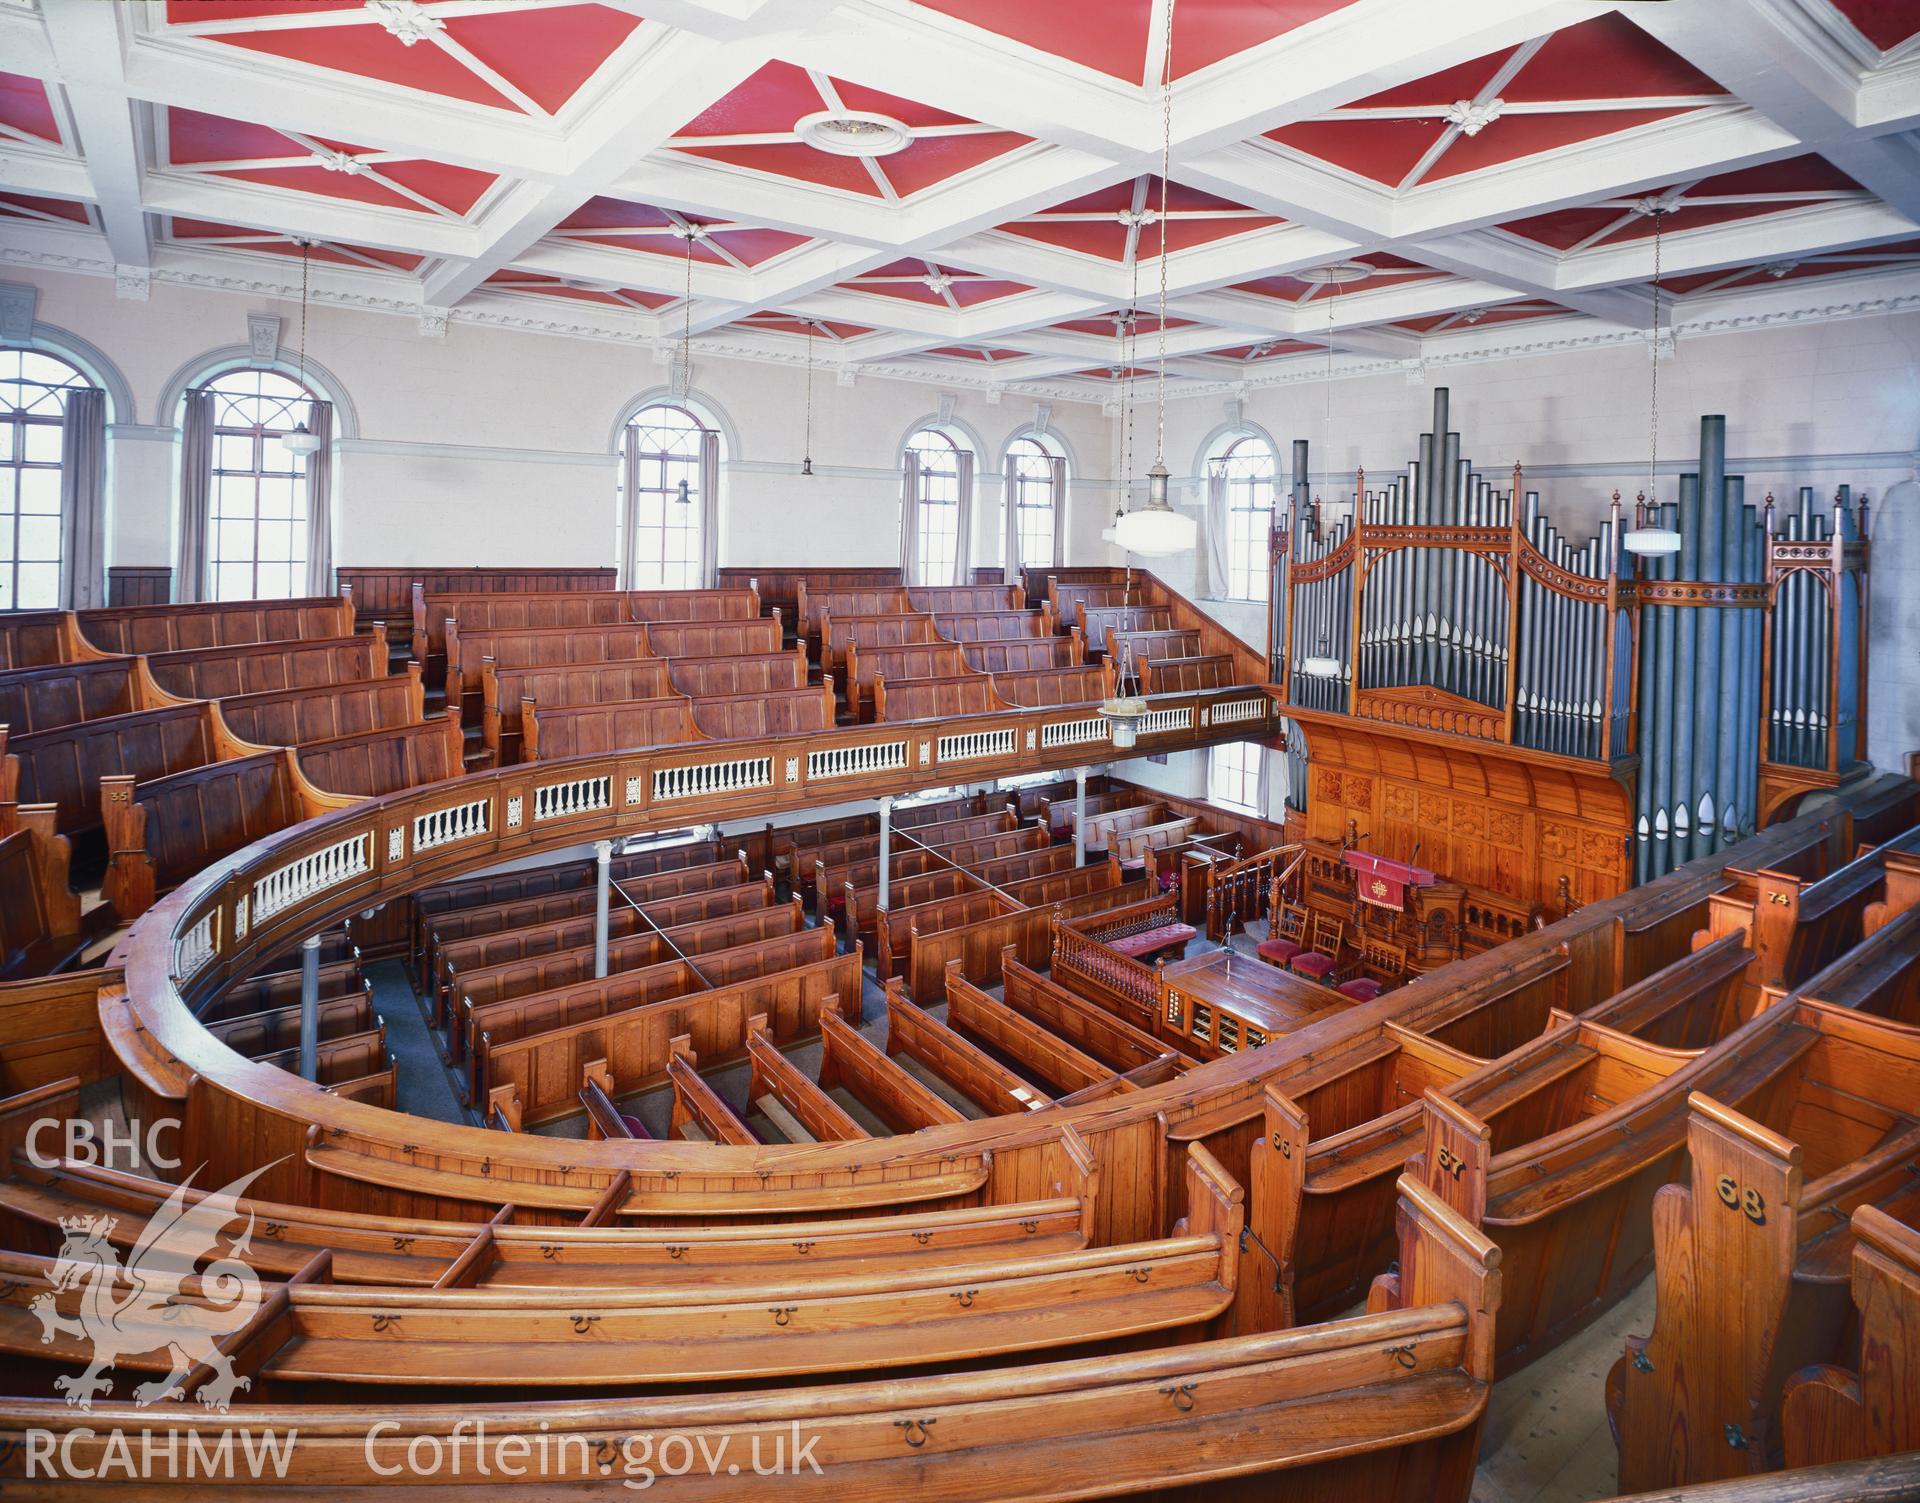 RCAHMW colour transparency showing interior view of Tabernacl Chapel, Aberystwyth, photographed by Iain Wright, 1997.